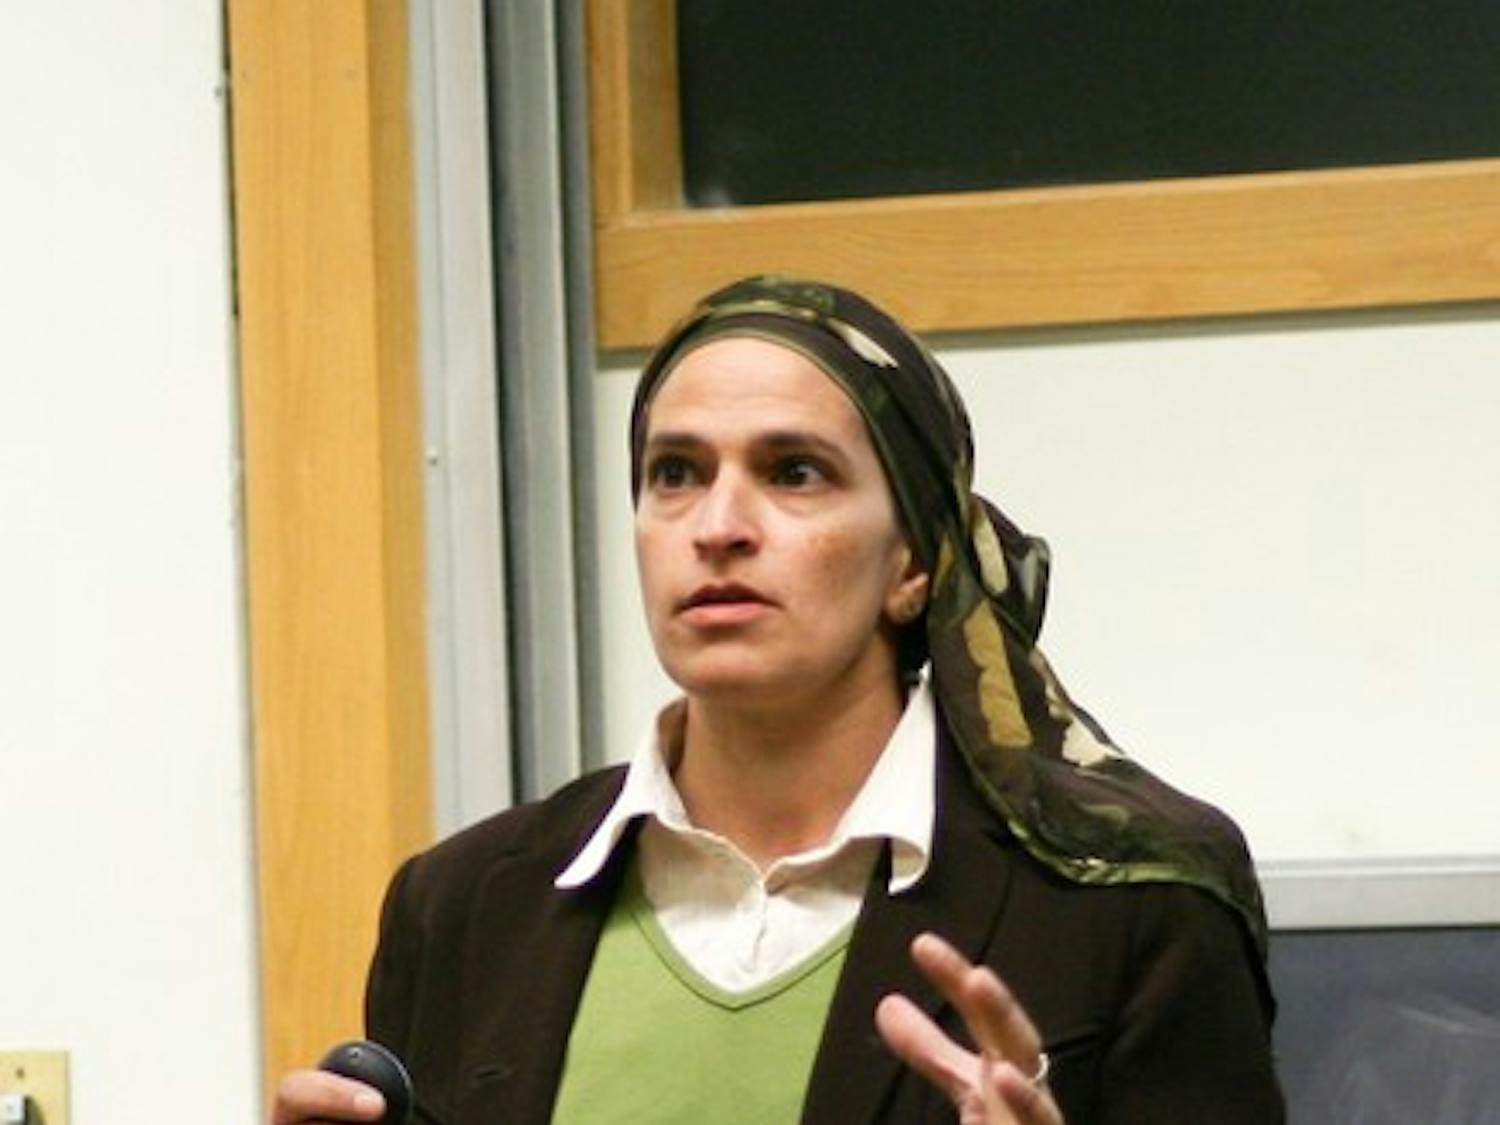 University of Wisconsin Law School professor Asifa Quraishi discussed Islamic and constitutional law in a lecture on Tuesday.